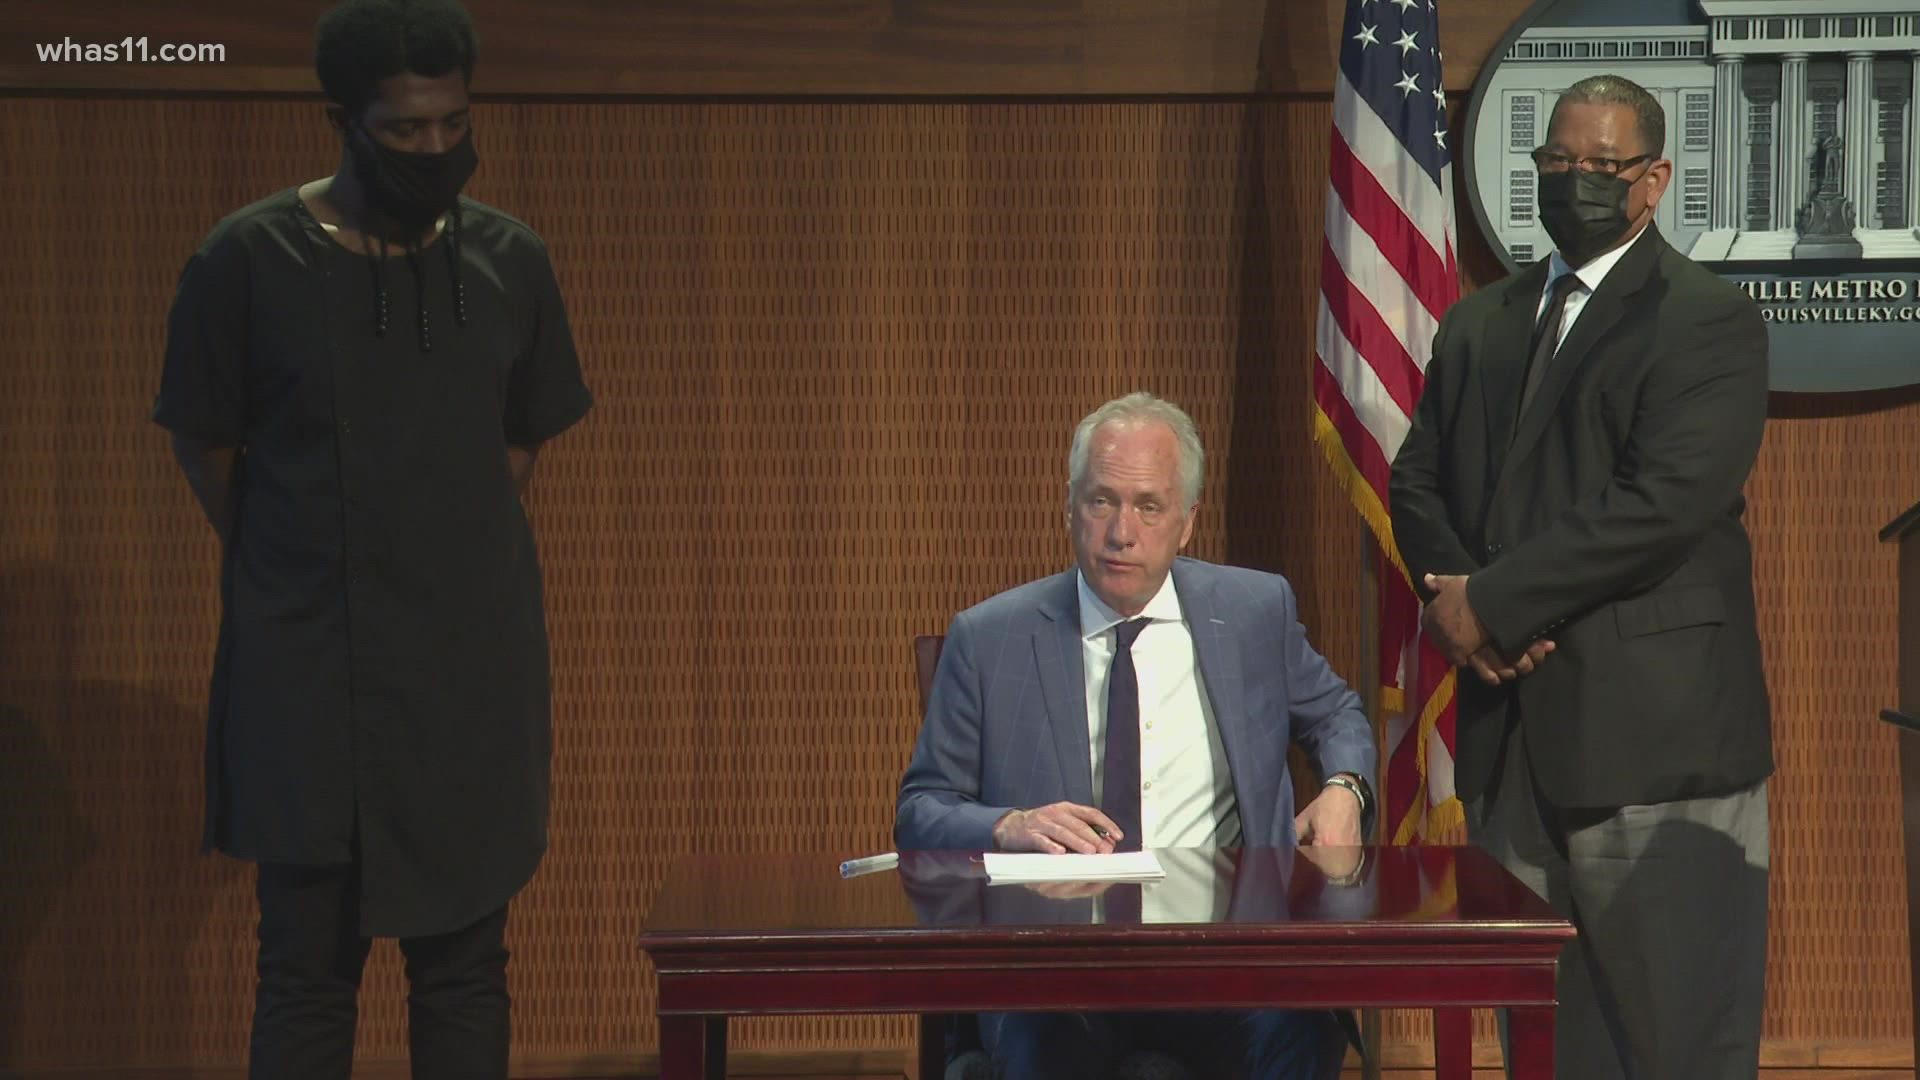 Louisville Mayor Greg Fischer signed a resolution to study the effects of potential compensations to descendants of slaves or even all Black Americans.